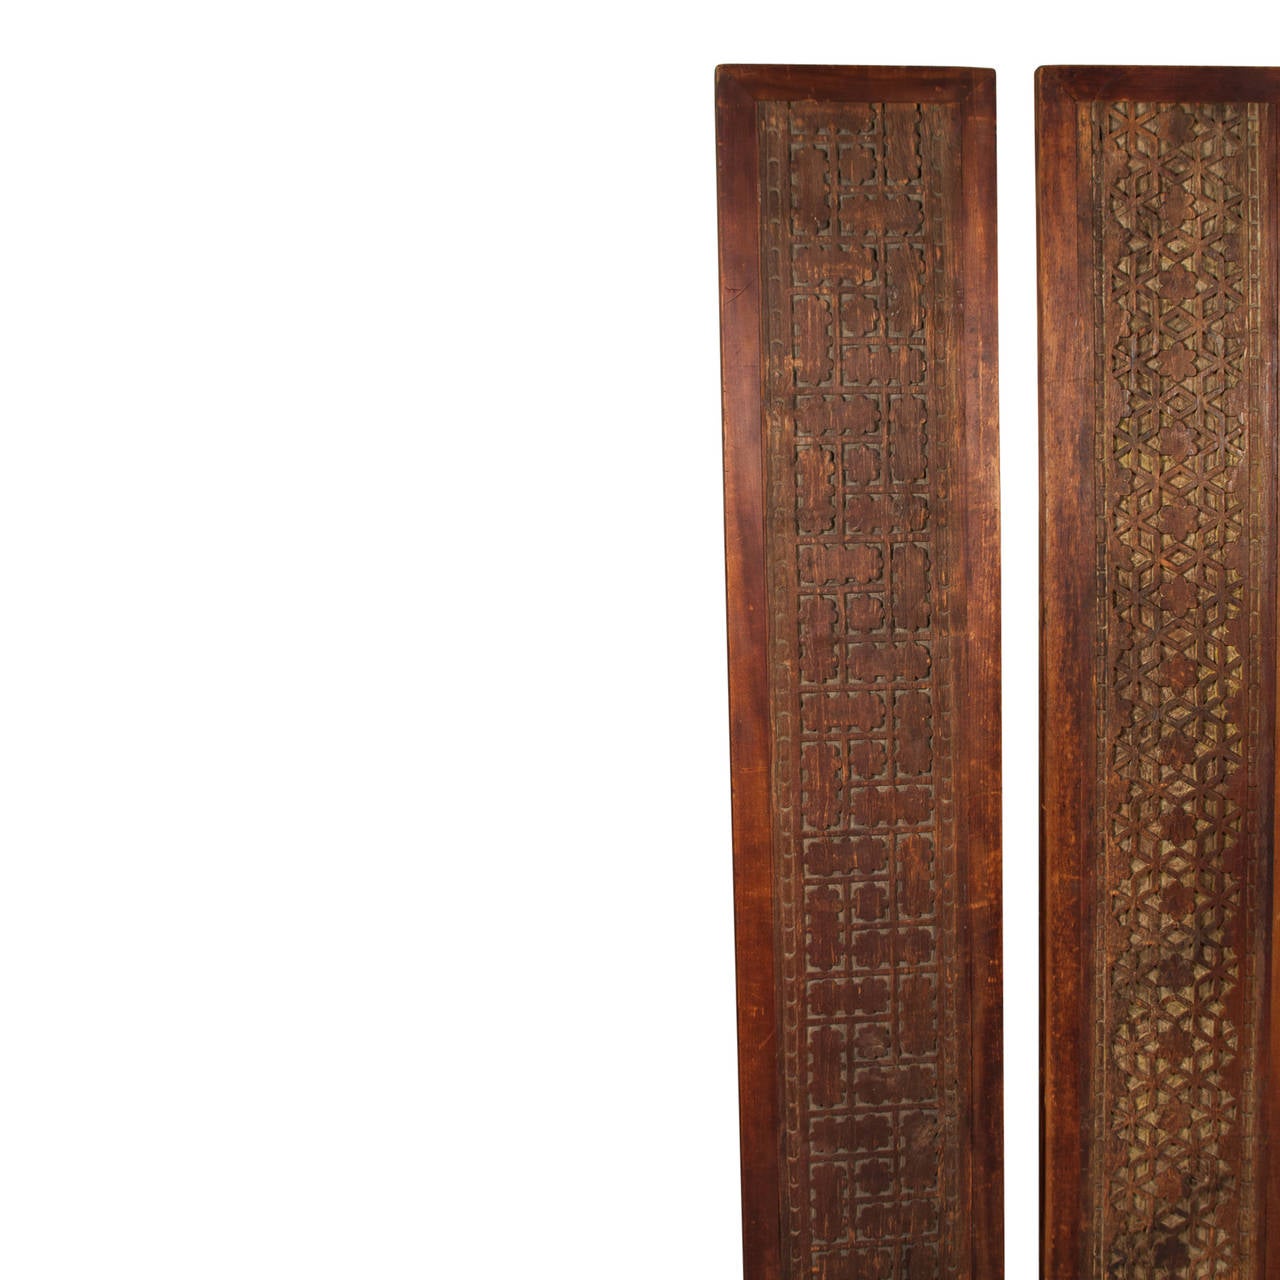 Two architectural panels with geometric relief carvings, Indonesian, 1960s. Height 74 in, width 14 1/2 in, depth 2 in. (sats)